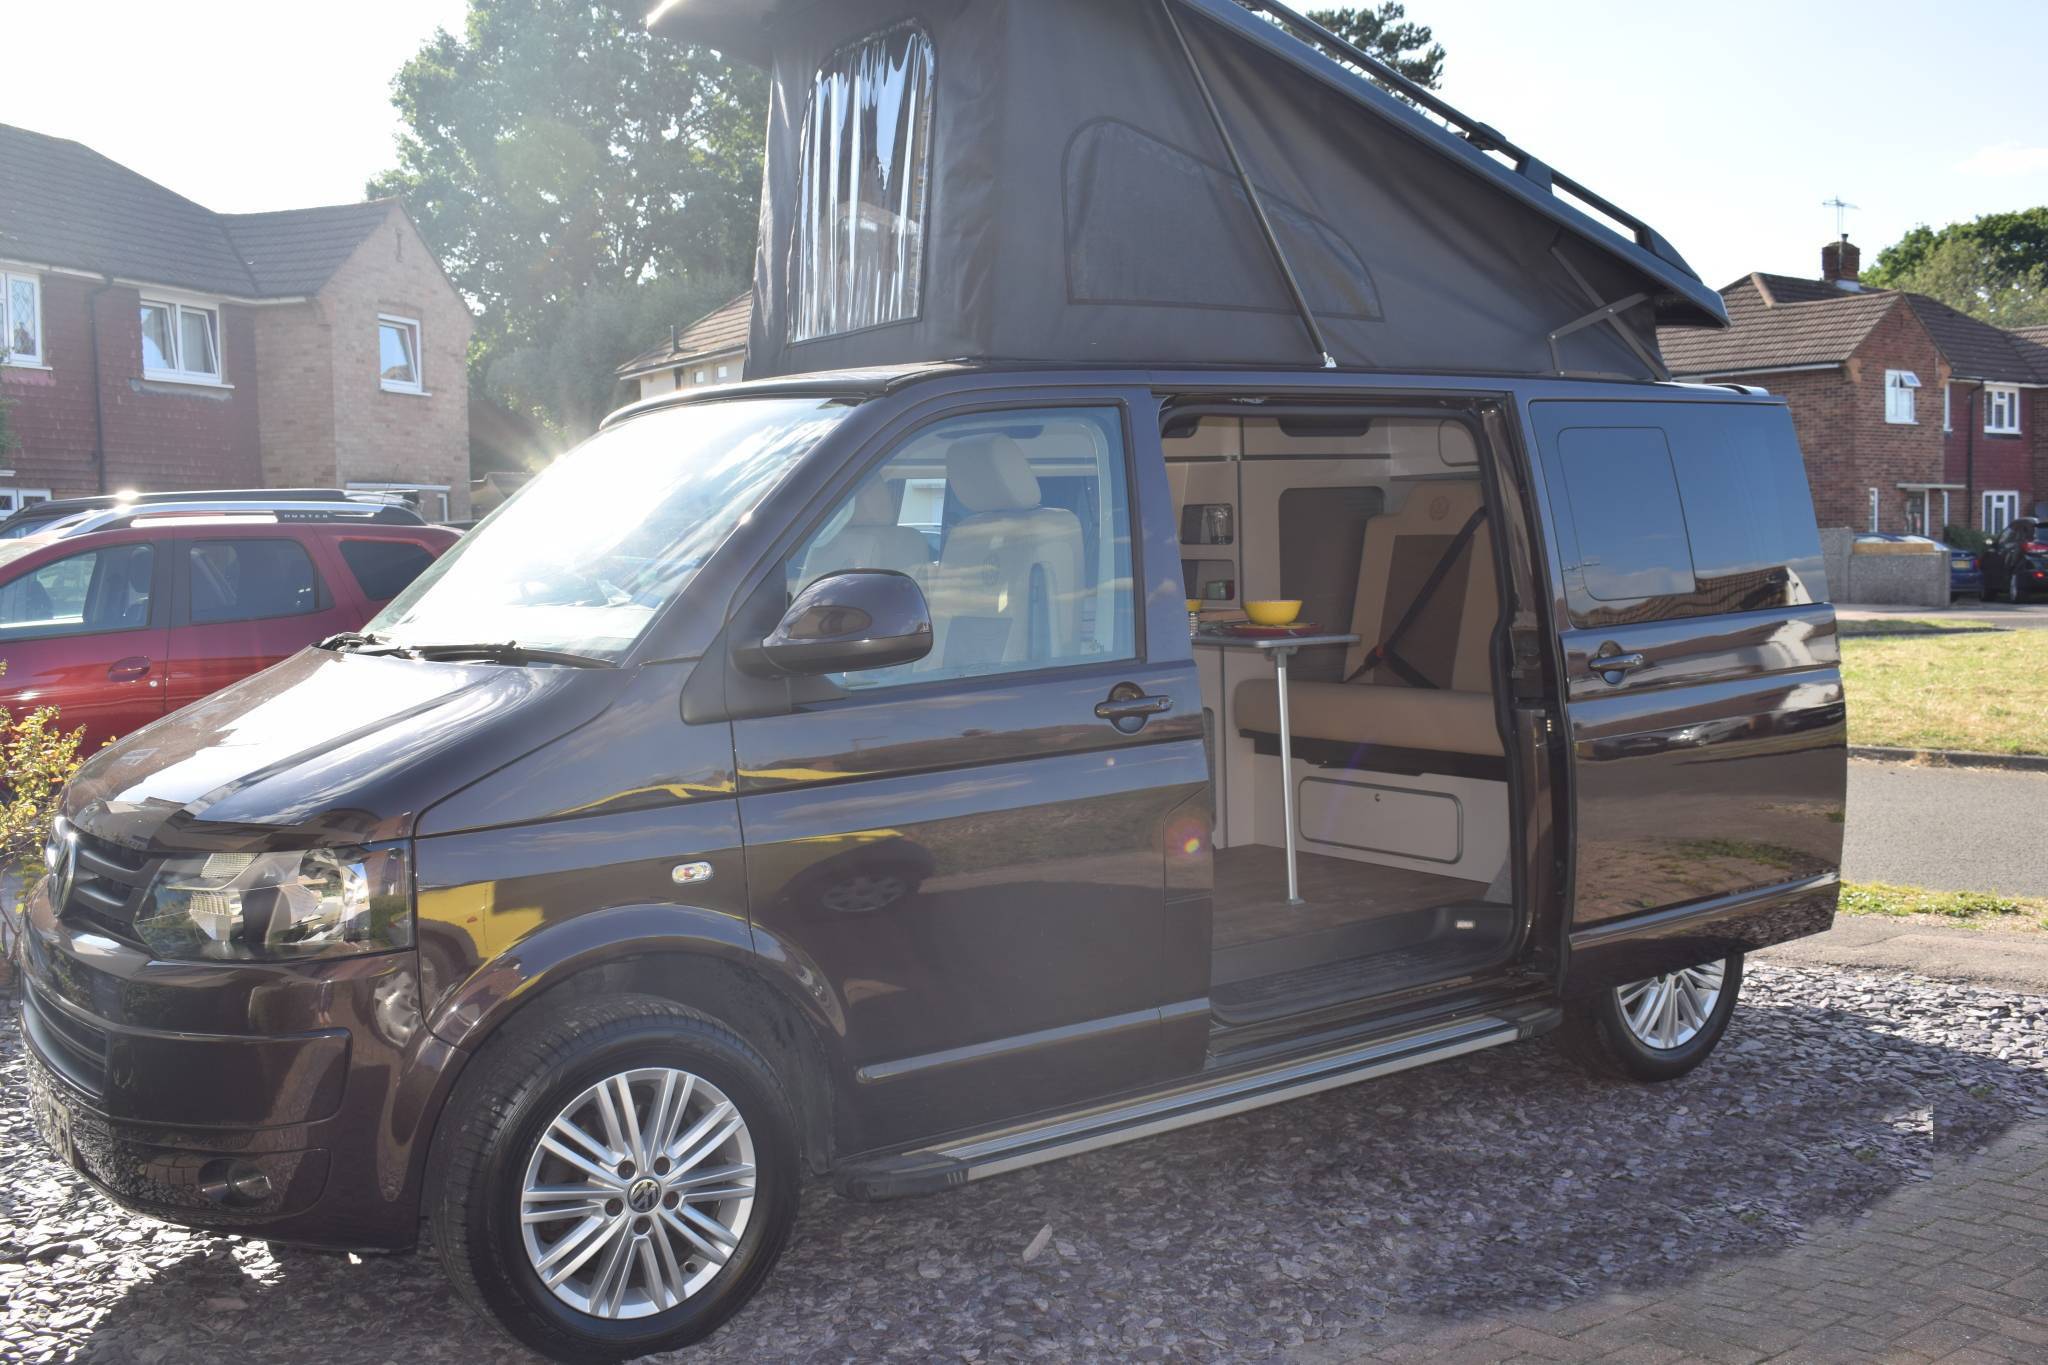 A VW T5 Campervan called BertieT and for hire in Horley, England